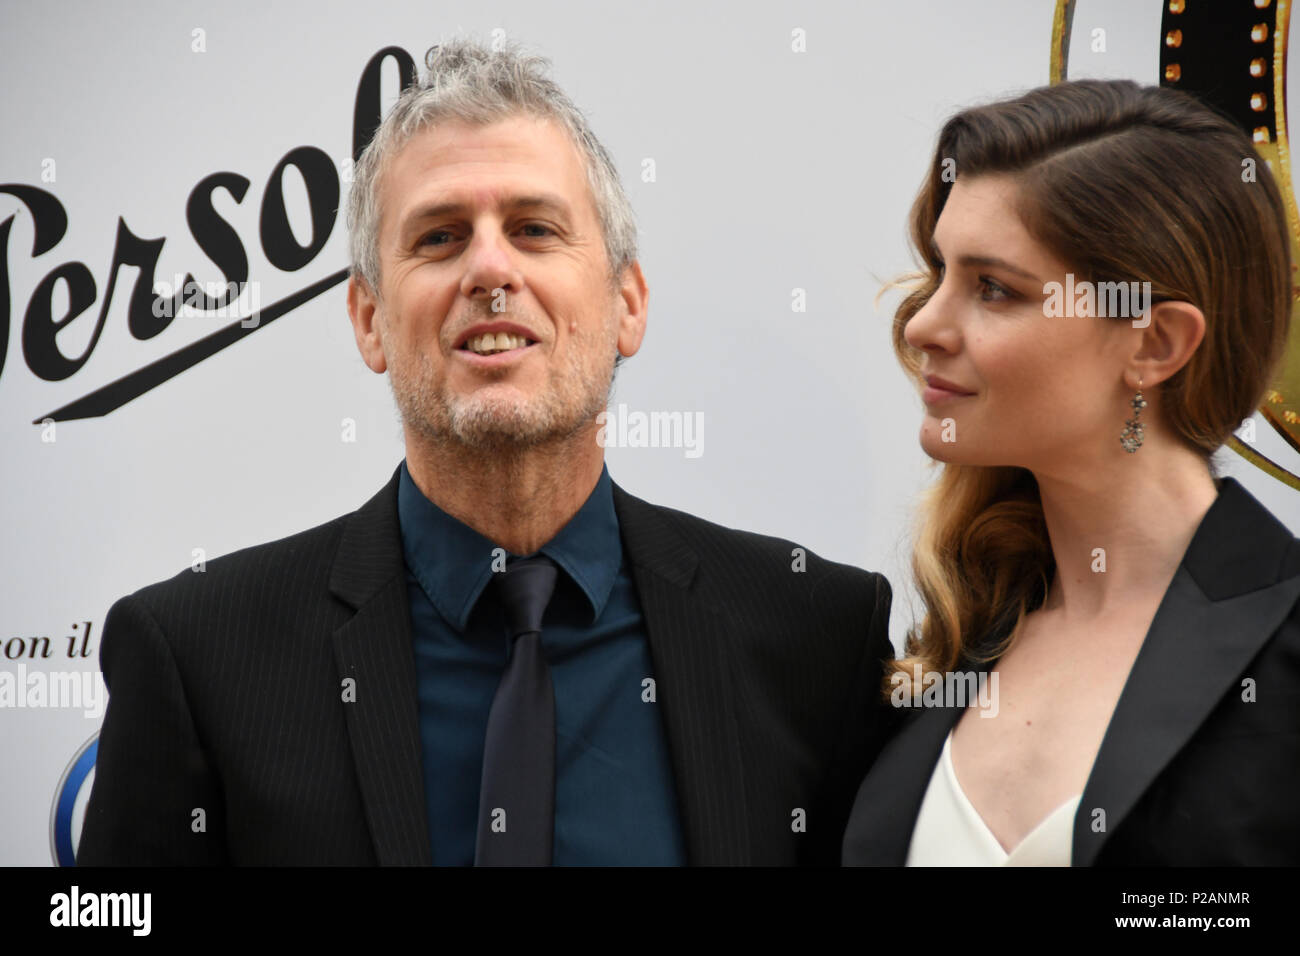 Rome Italy 13 June 2018 - Villa Medici - 2018 golden globe award 58th edition FabrizioLucci best photography "the place" and with the girlfriend Vittoria Puccini Credit: Giuseppe Andidero/Alamy Live News Stock Photo